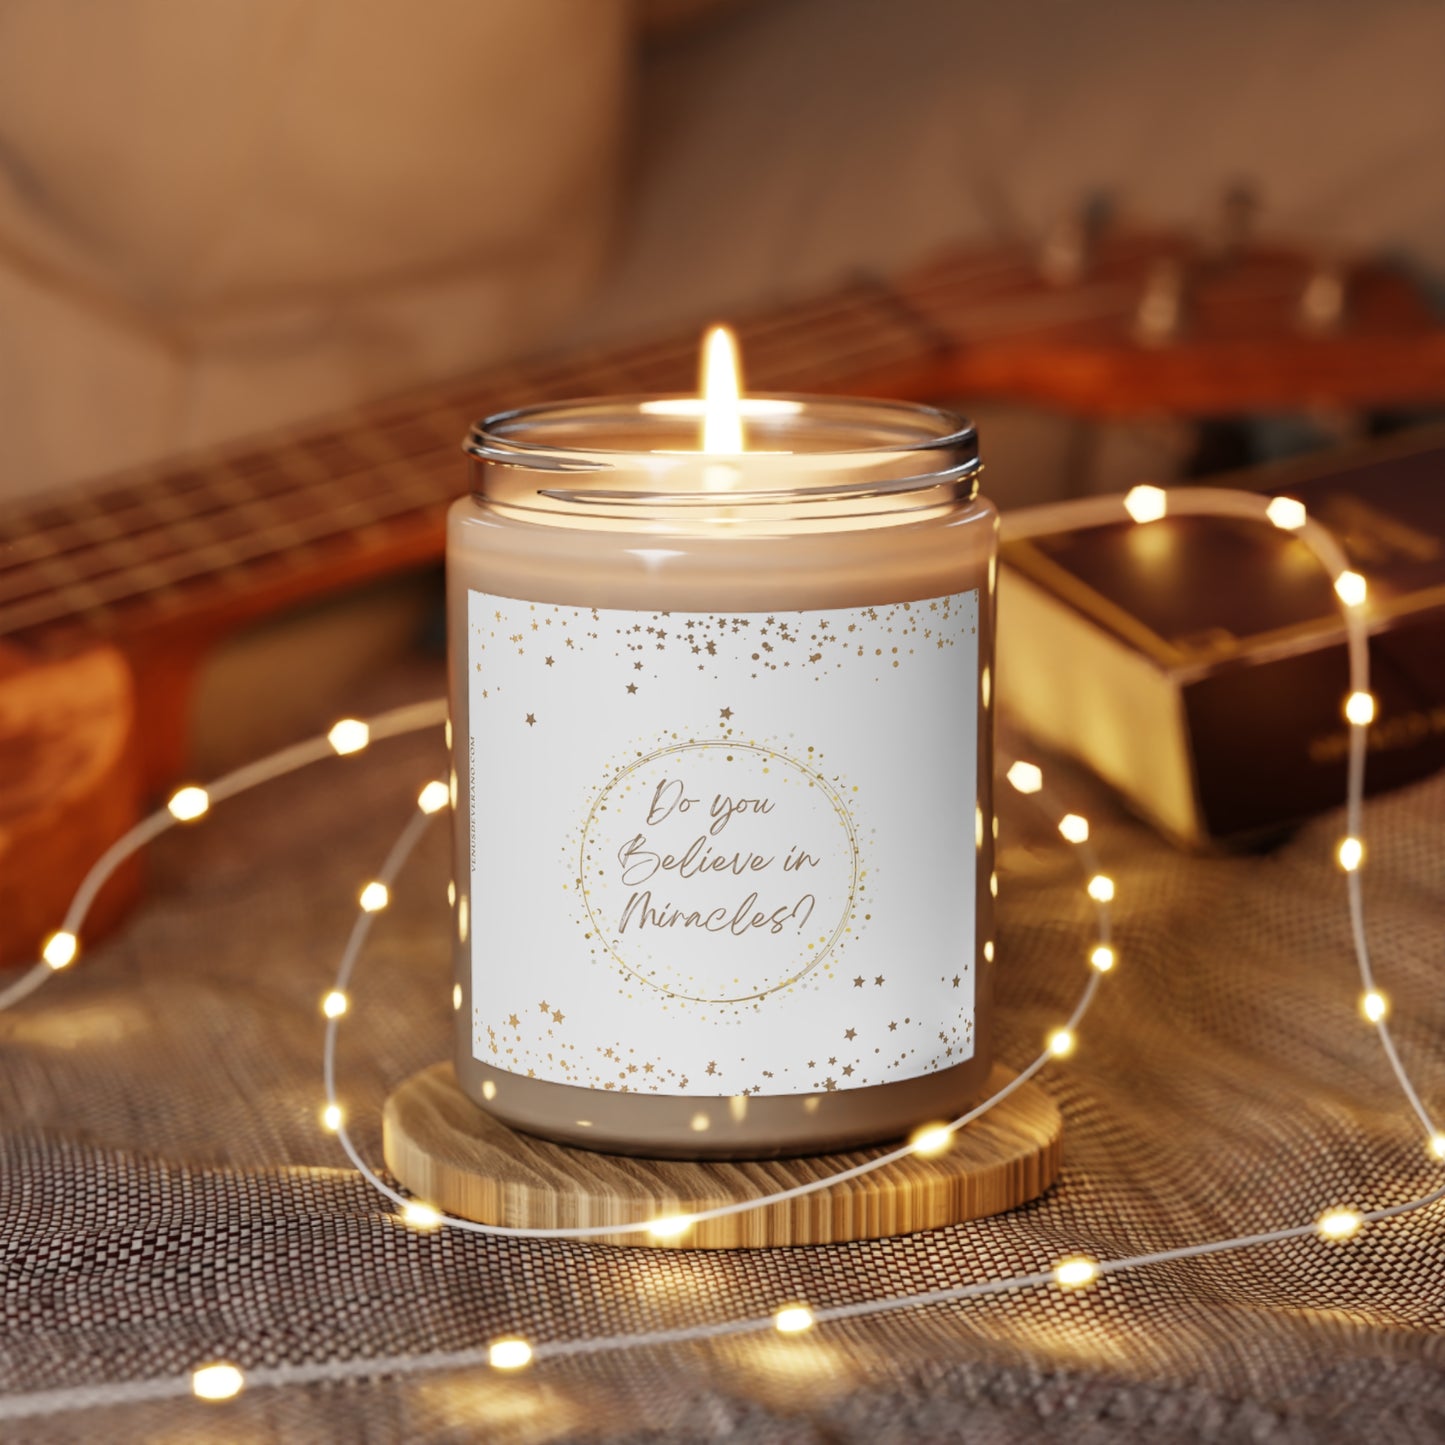 Scented Candle, 9oz - BELIEVE in miracles - Made from vegan soy coconut wax, hand-poured | 2 ambrosial fragrances available, Cinnamon Stick and Vanilla.